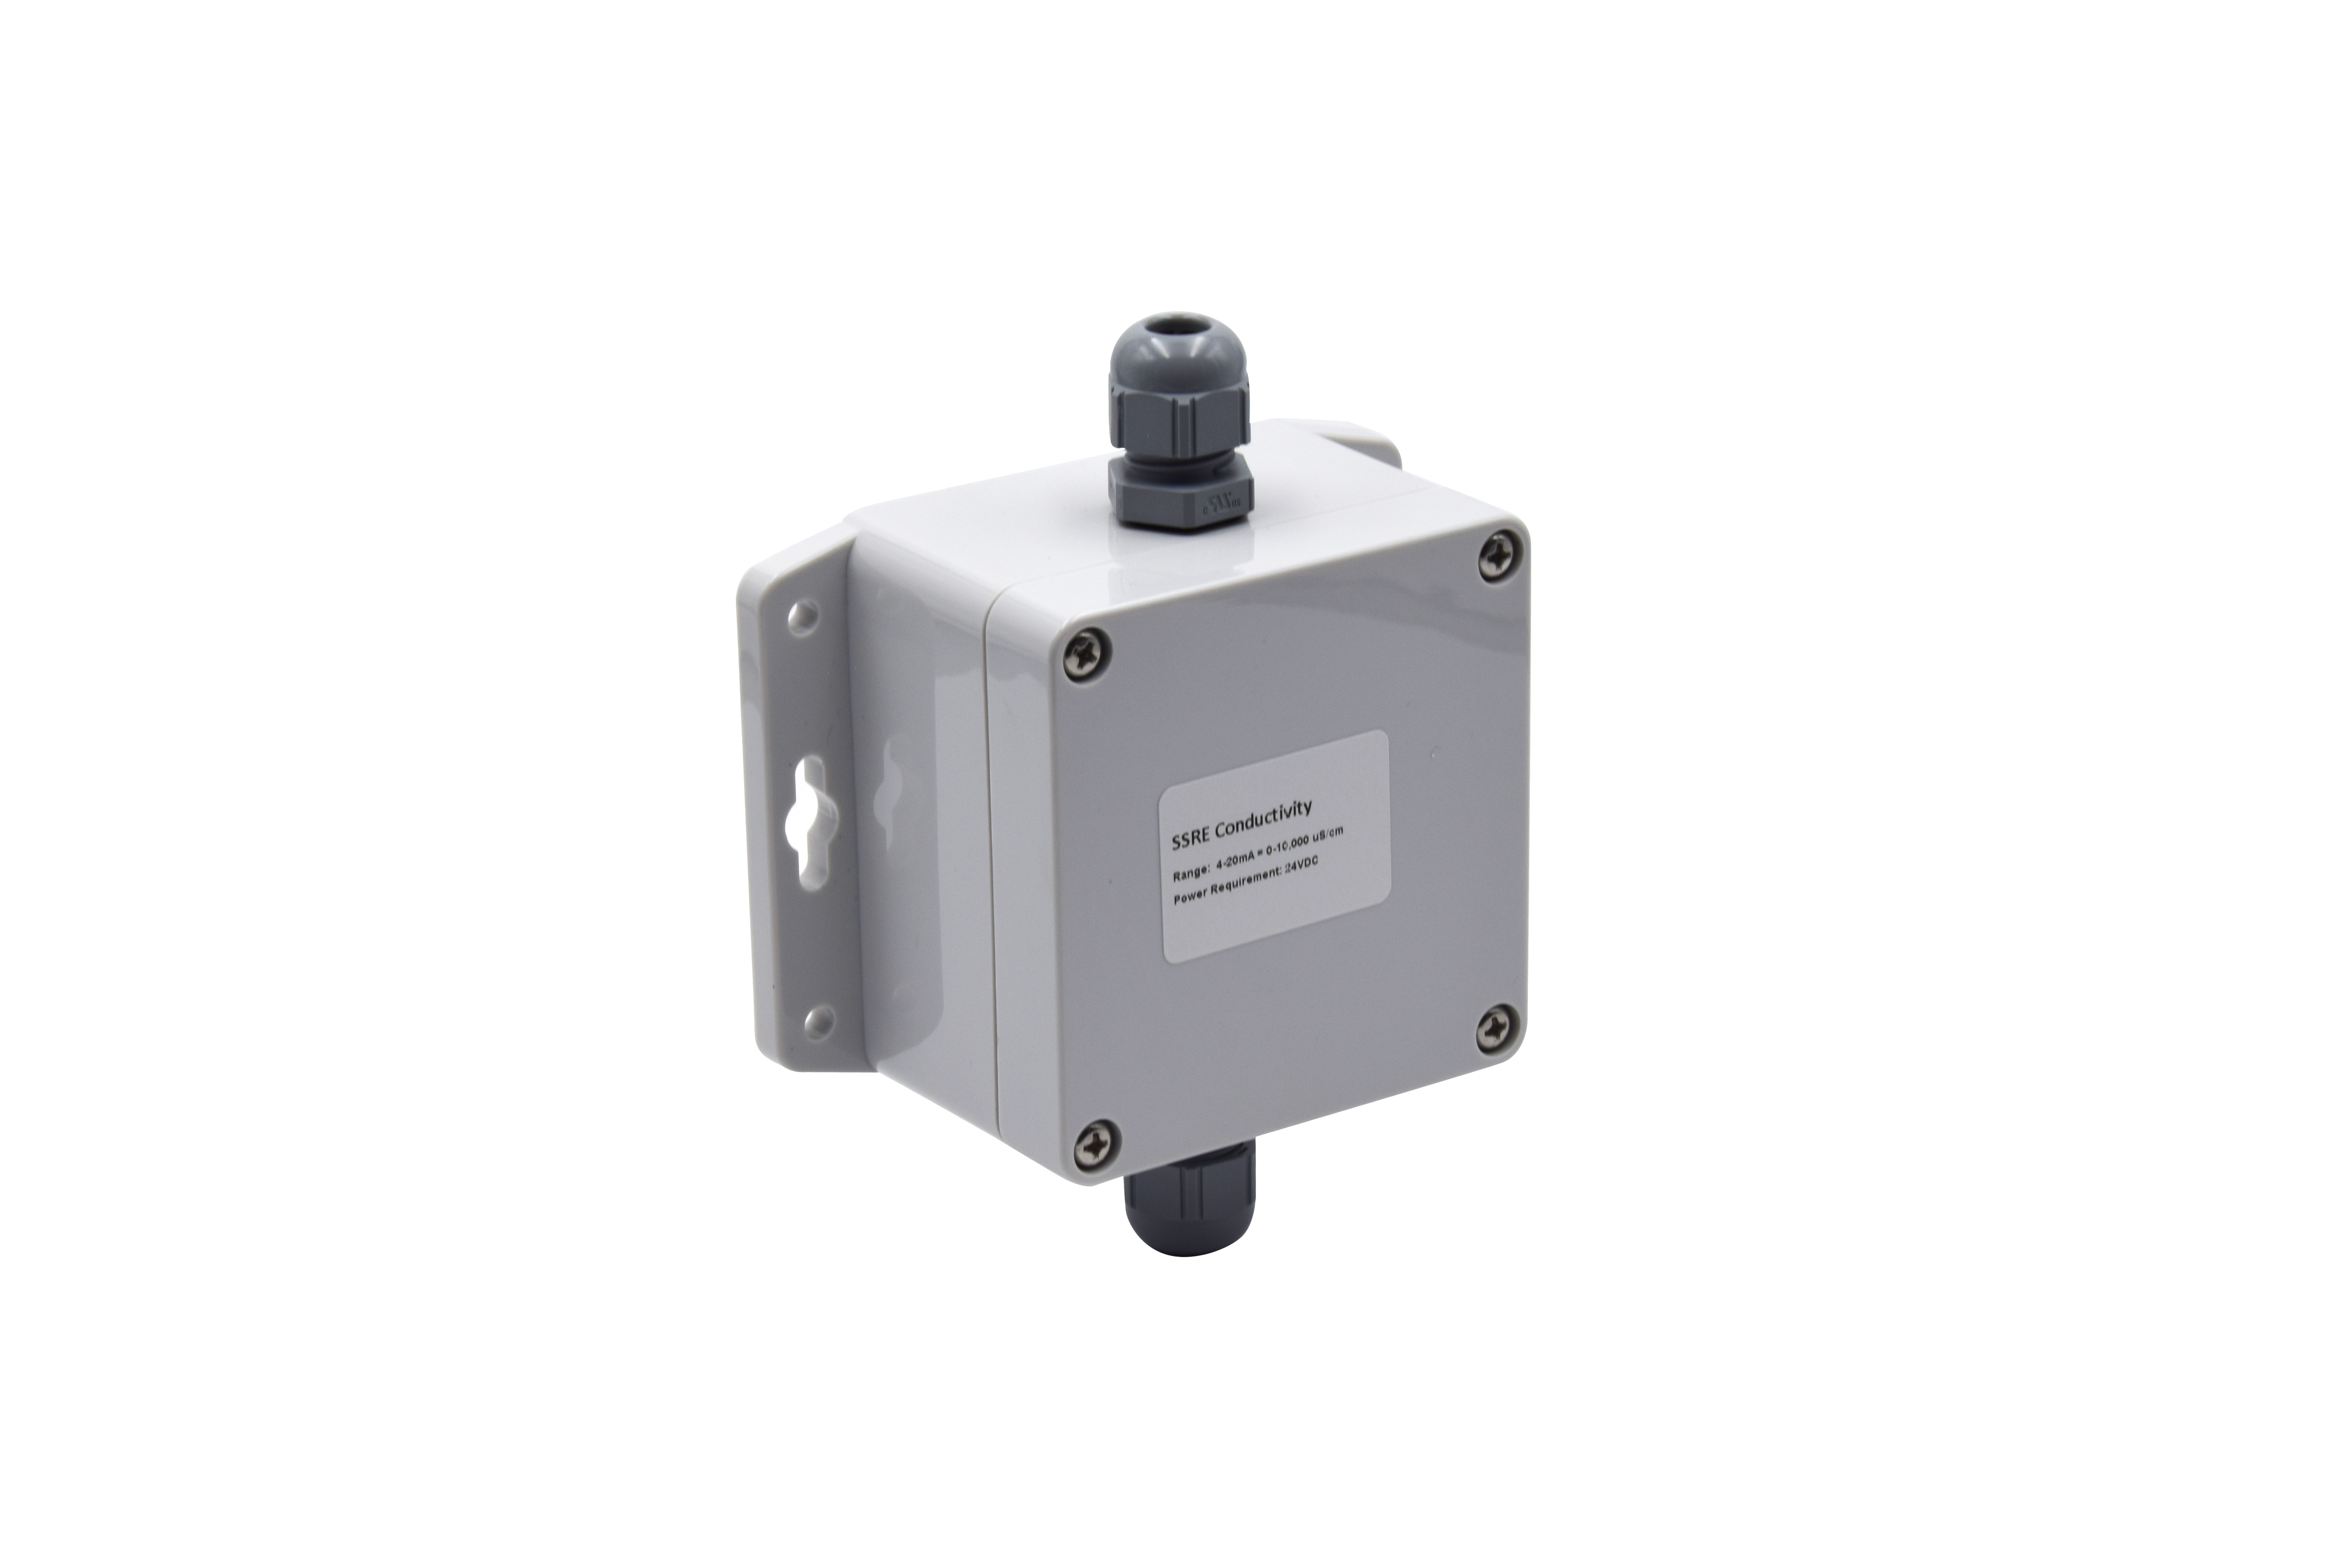 NeoTec signal converter 4-20 mA (conductivity, cell constant c=1.0) in enclosure (wall mounting)